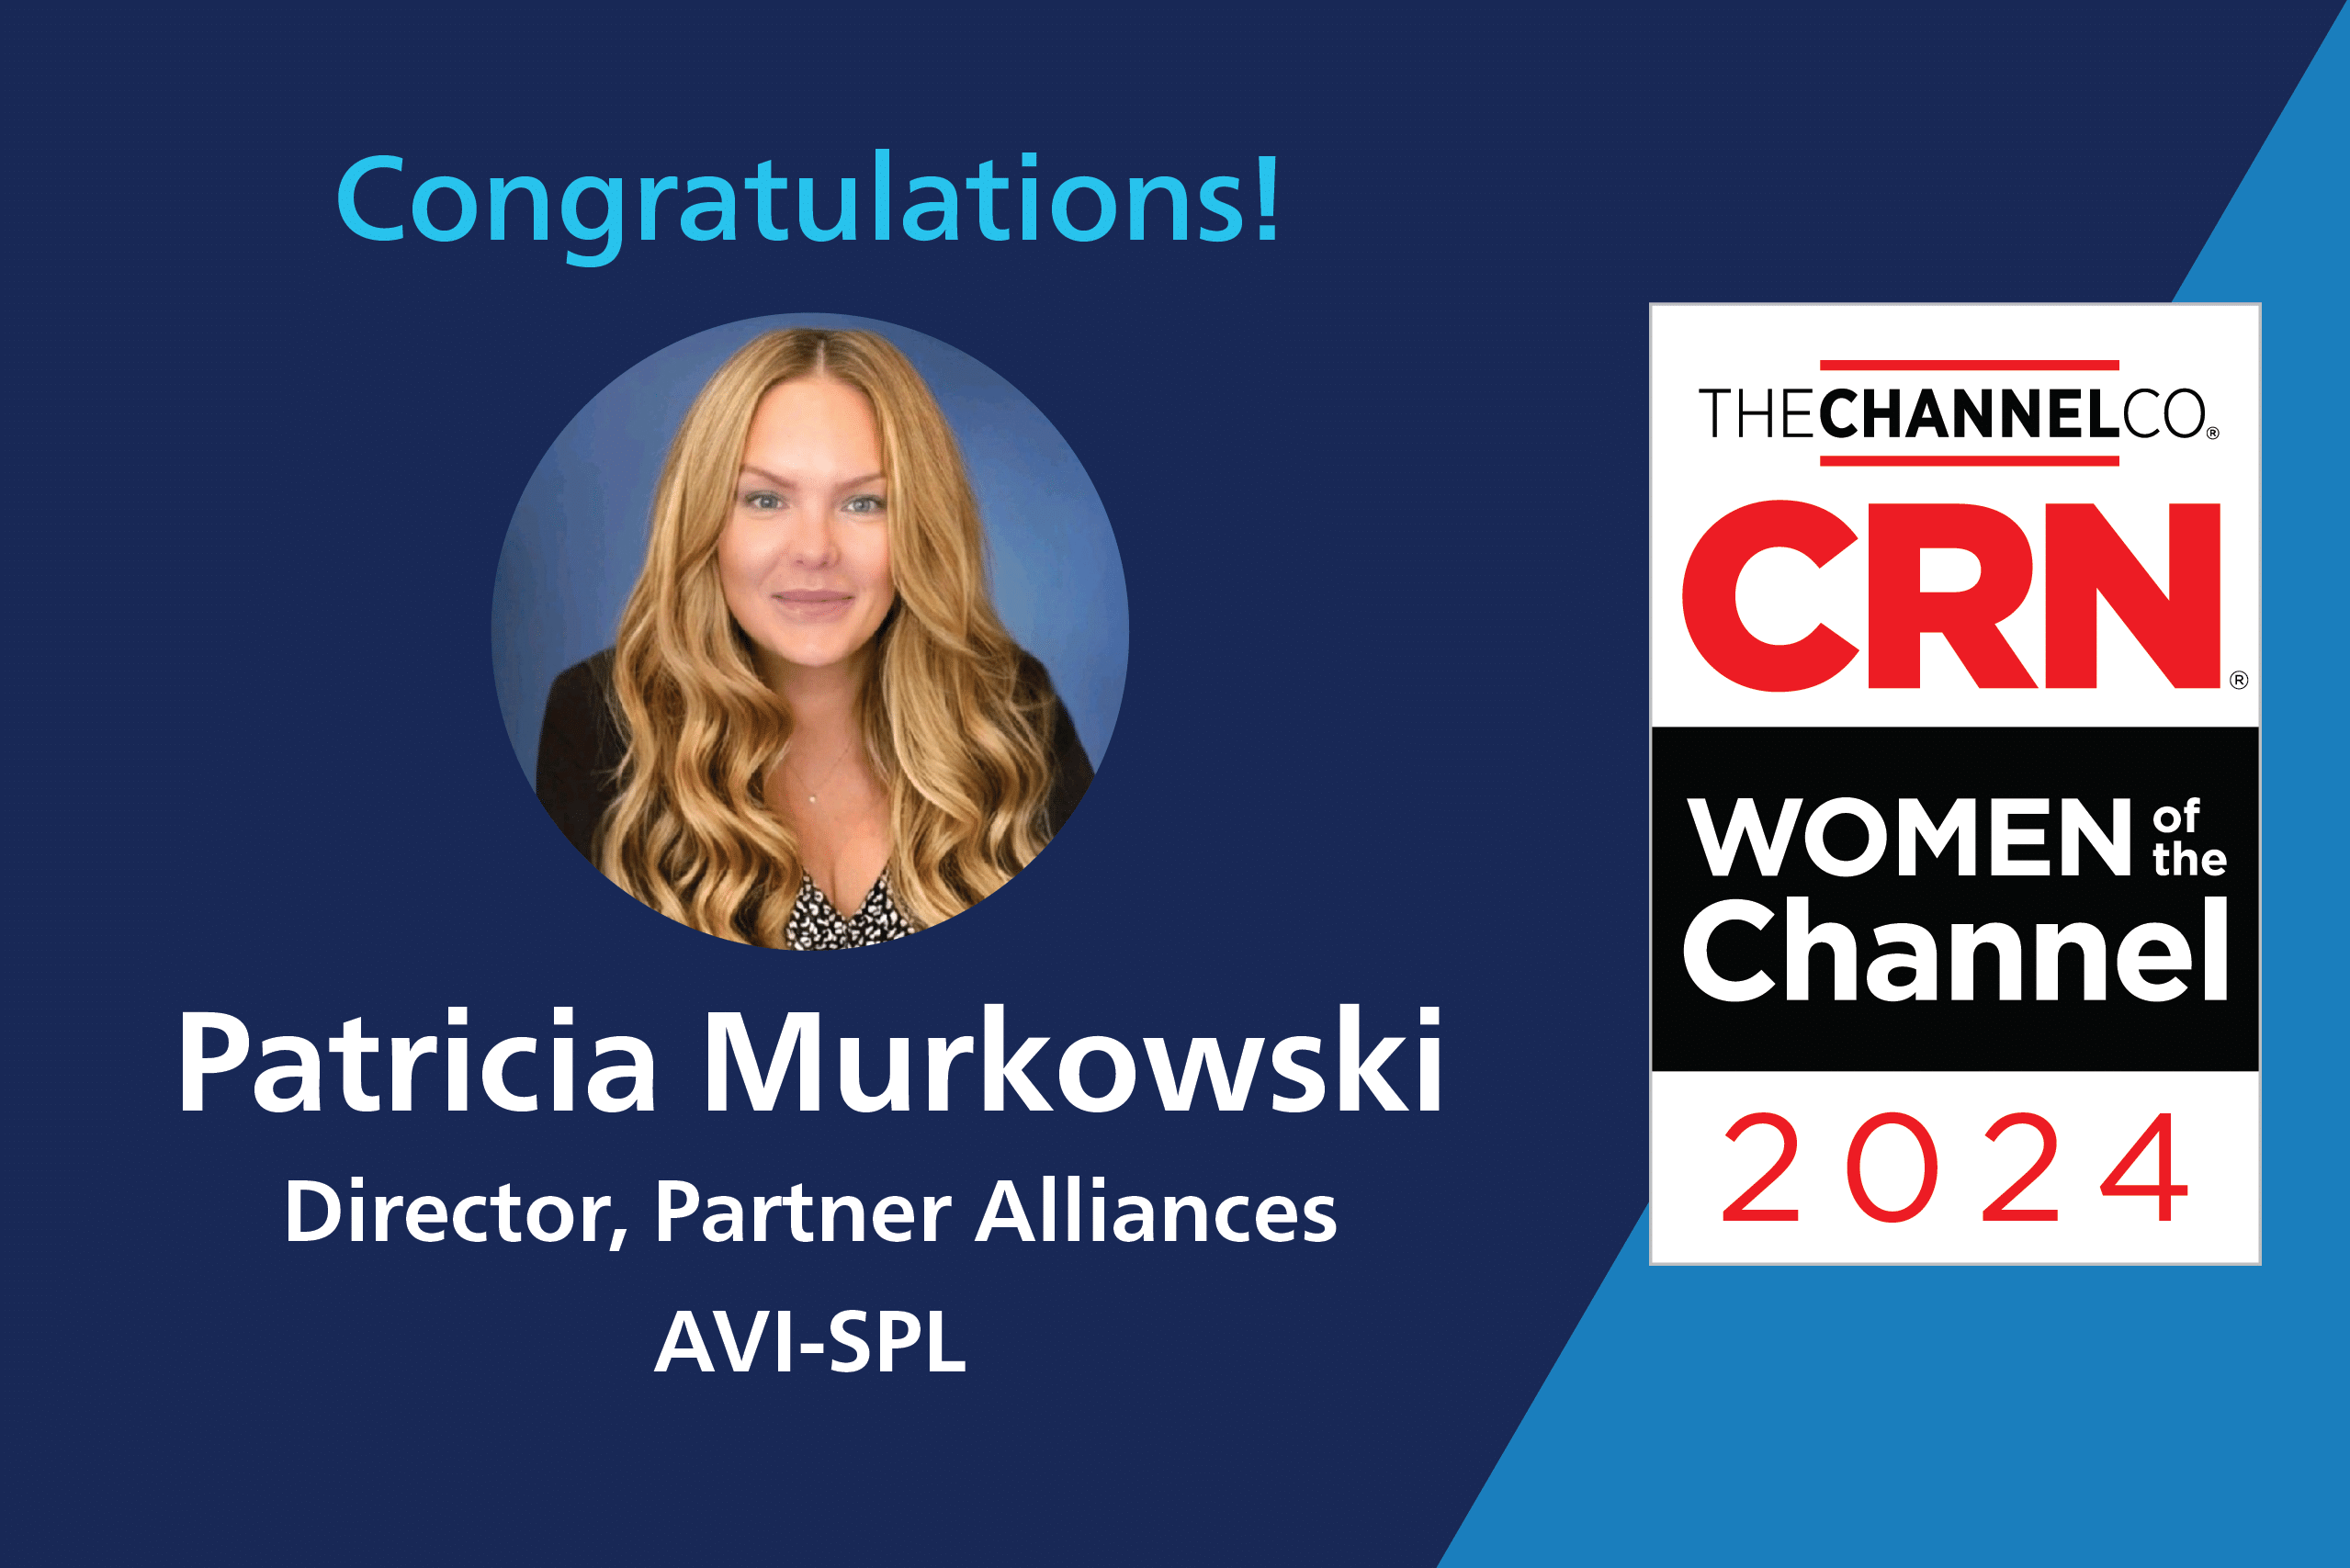 CRN names AVI-SPL’s Patricia Murkowski to the Women of the Channel List for 2024